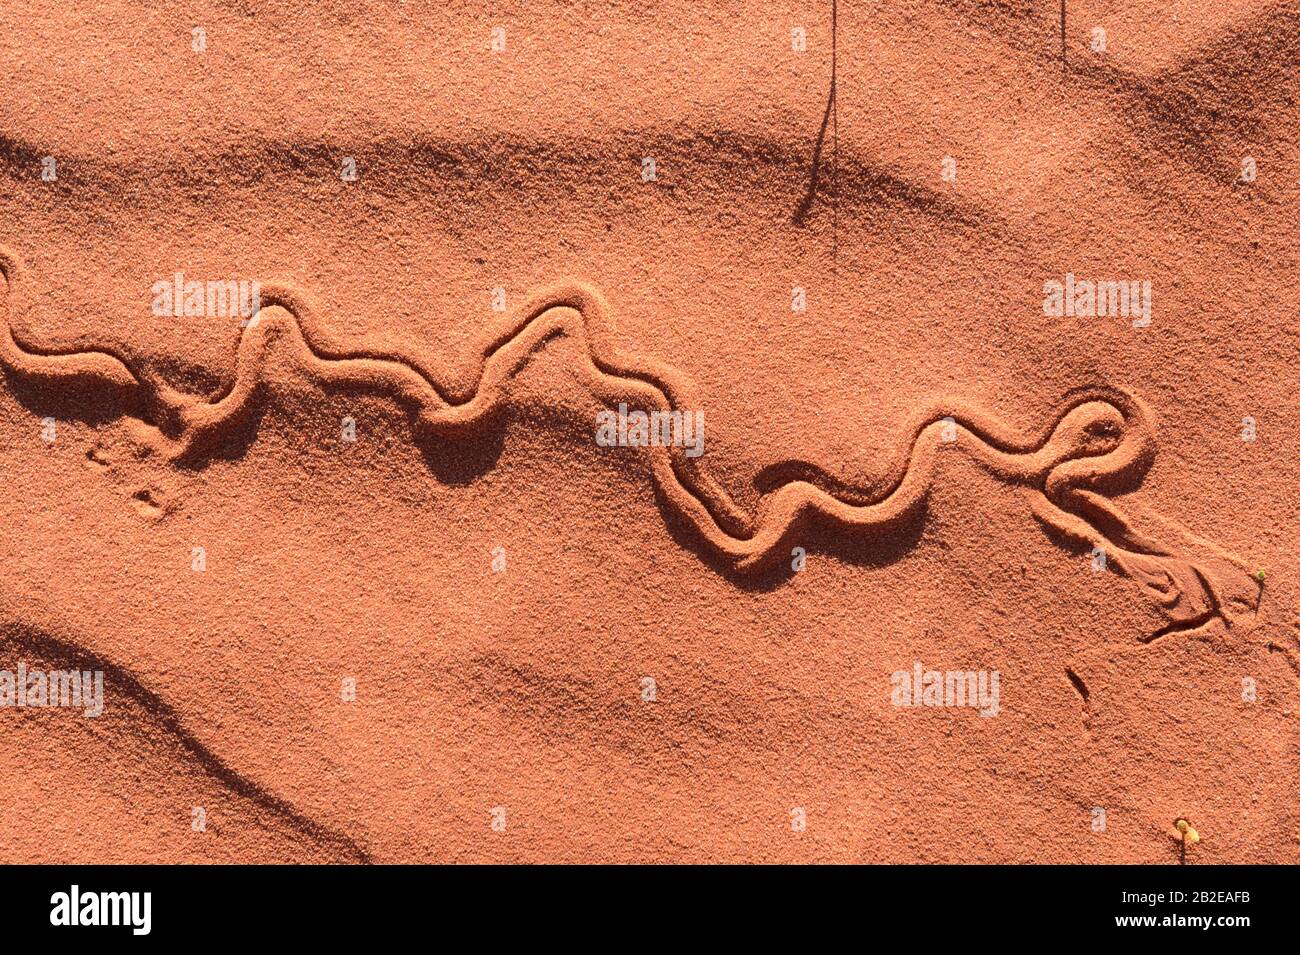 Animal tracks in red sand of the Australian Outback, south of Alice Springs, Northern Territory, NT, Australia Stock Photo